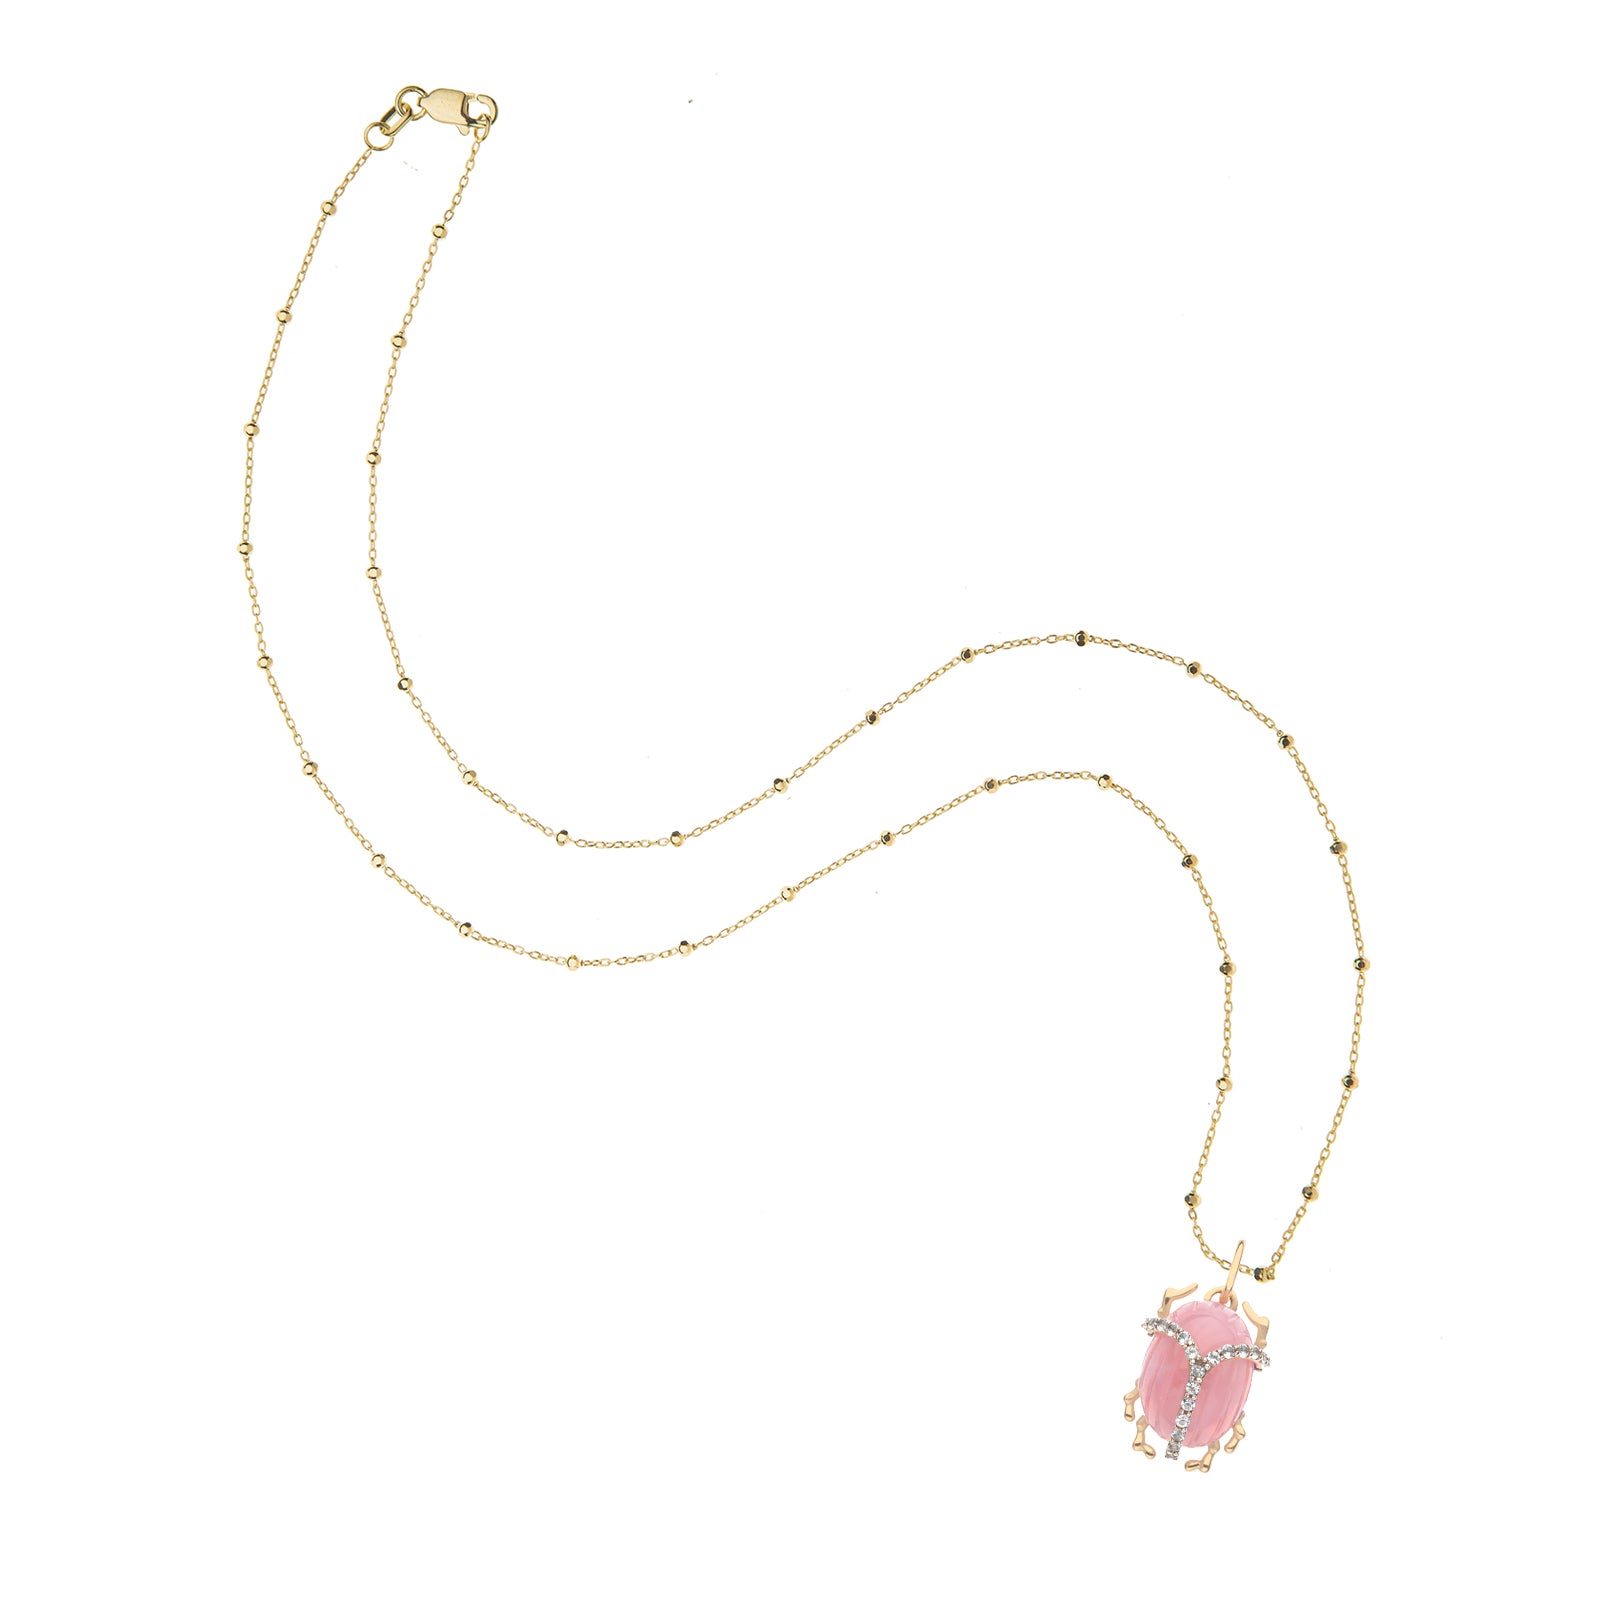 JW x House of Harris PROTECT Pink Jade Scarab Pendant in Solid Gold